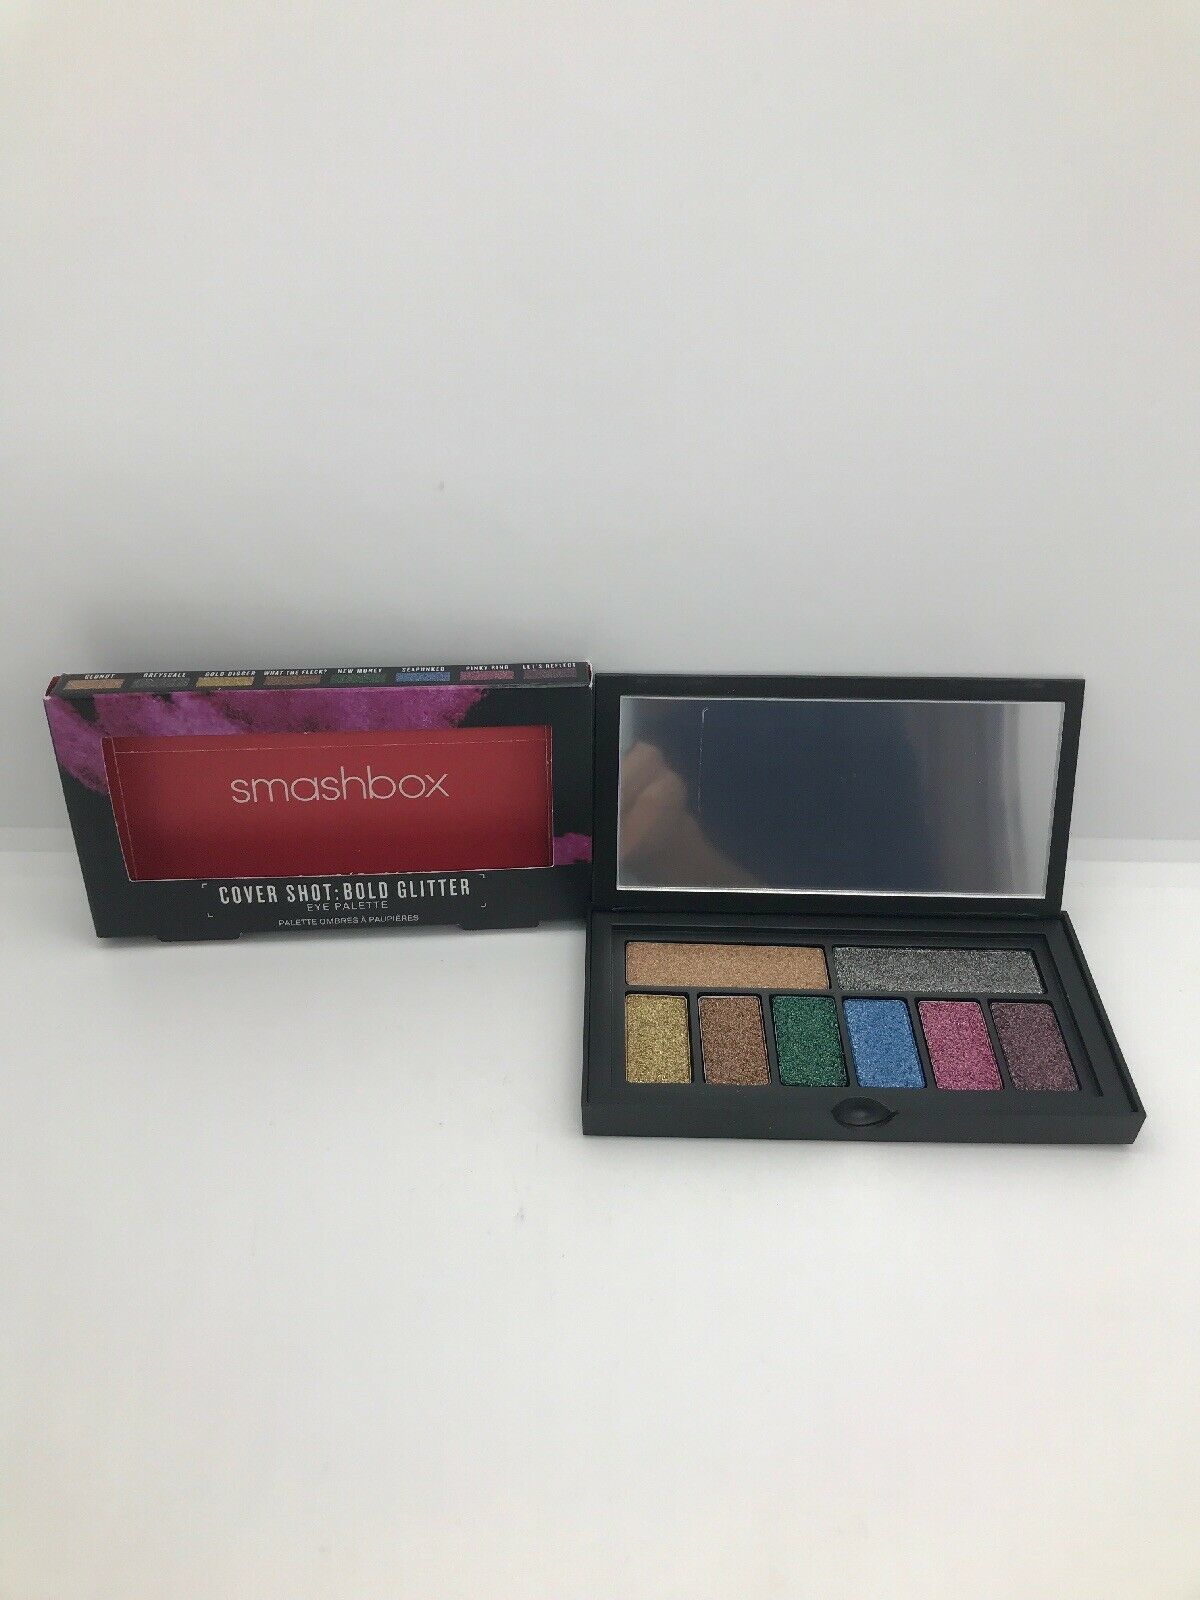 Primary image for Smashbox Cover Shot Eye Eyeshadow Palette in Bold Glitter - Full Size New In Box